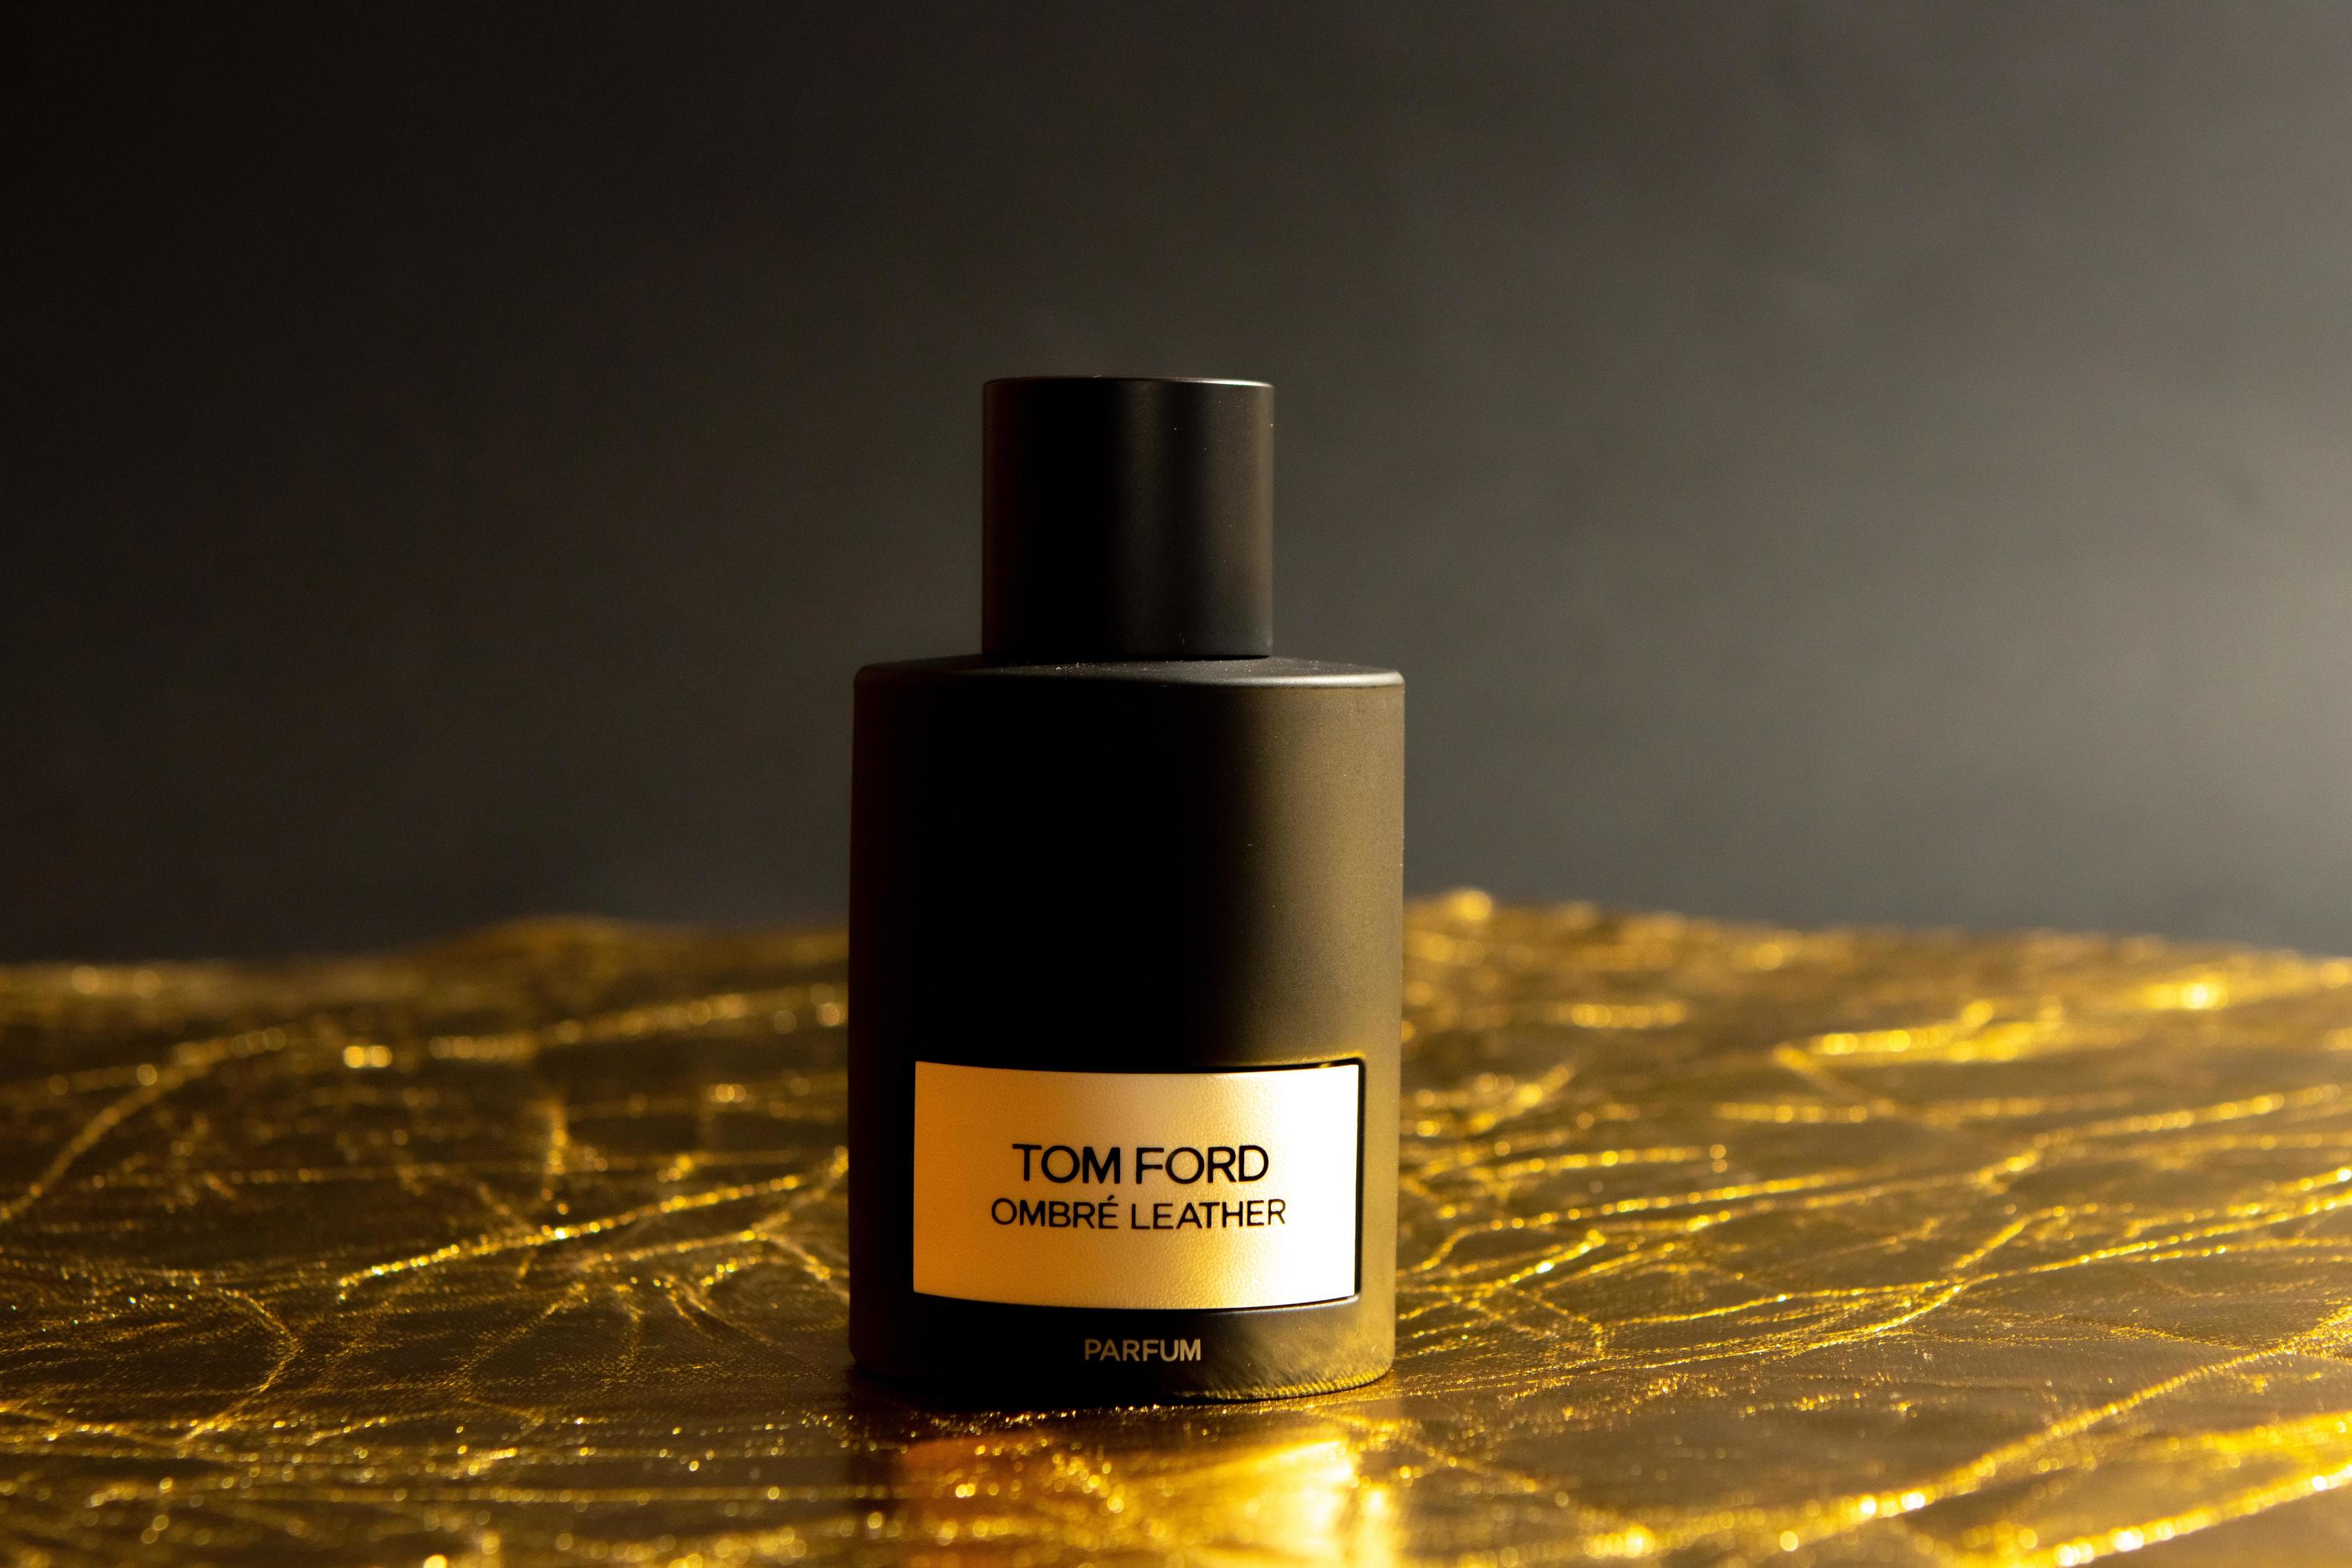 Tom Ford ombre leather parfum on gold background, Yerevan, Armenia